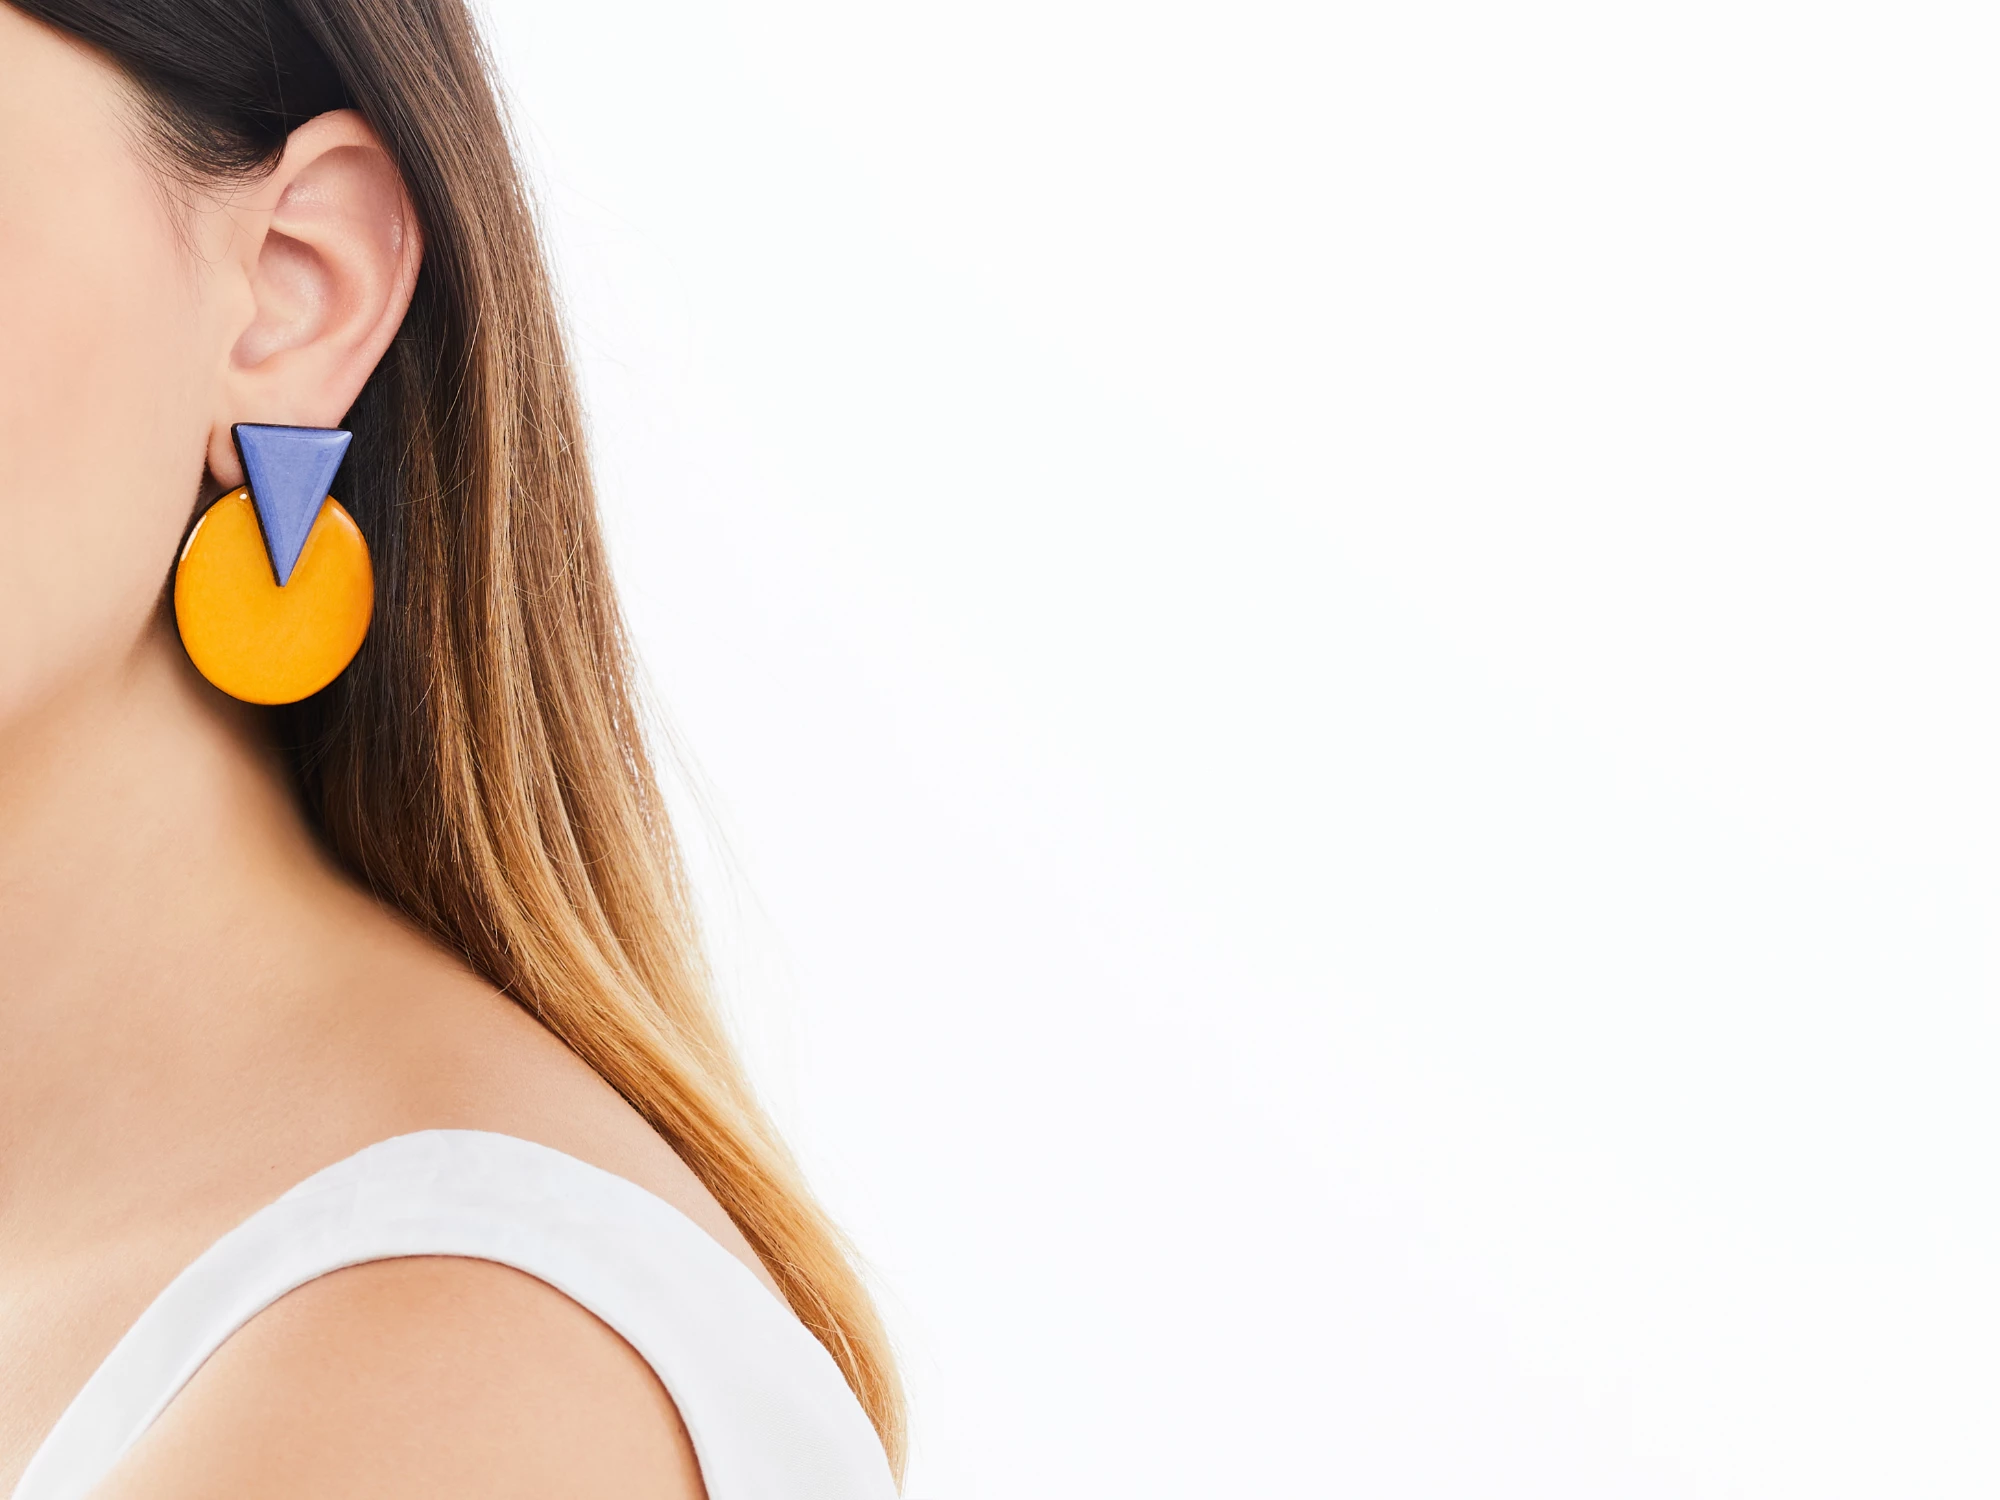 EARRINGS SYNTHESIS OF CIRCLES & TRIANGLES